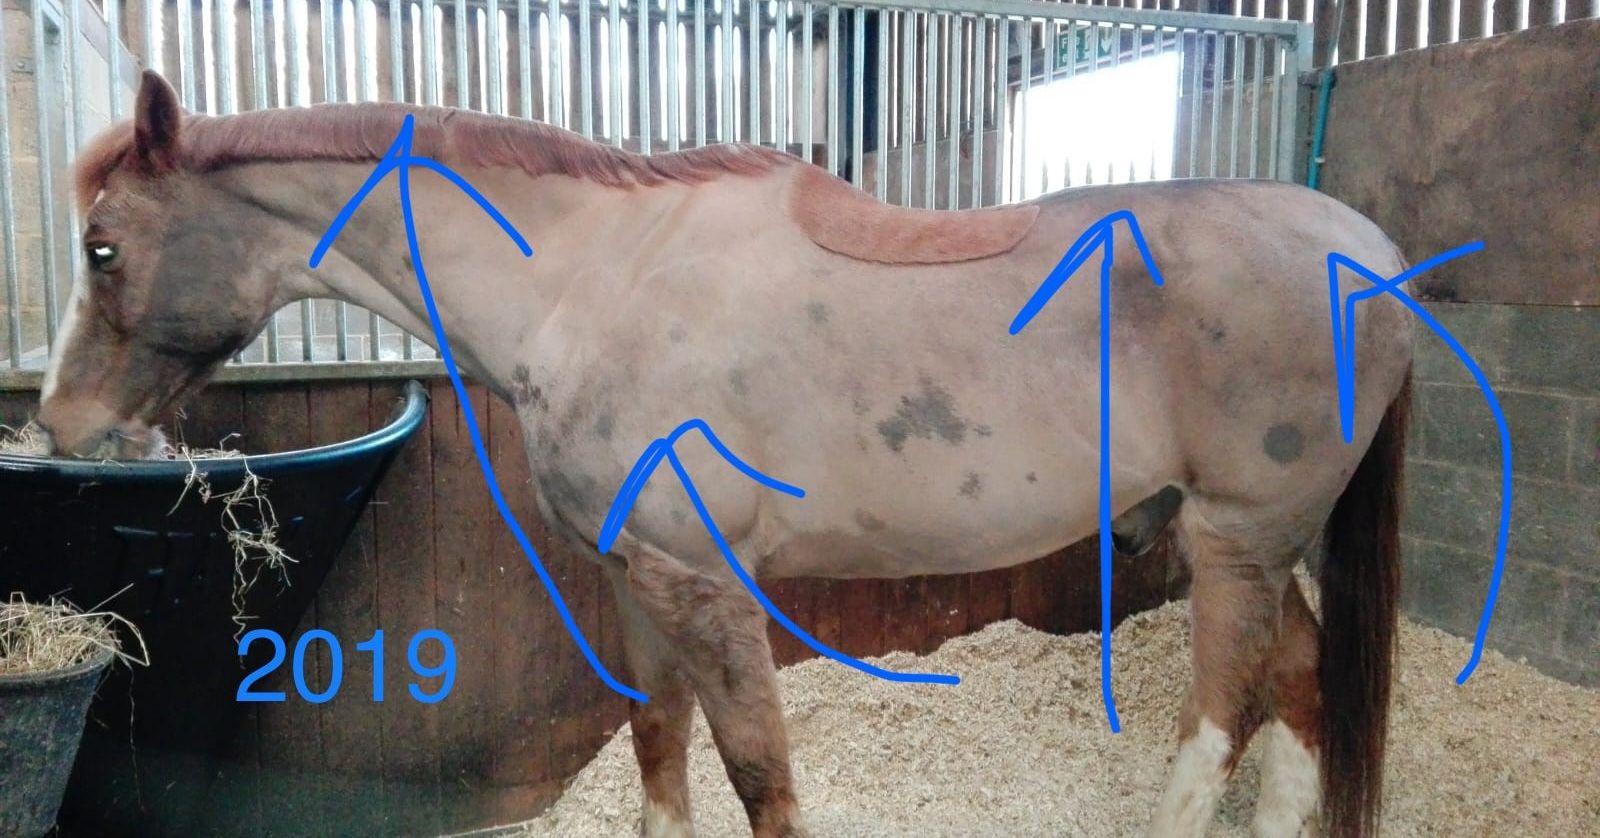 Our client's horse in 2019